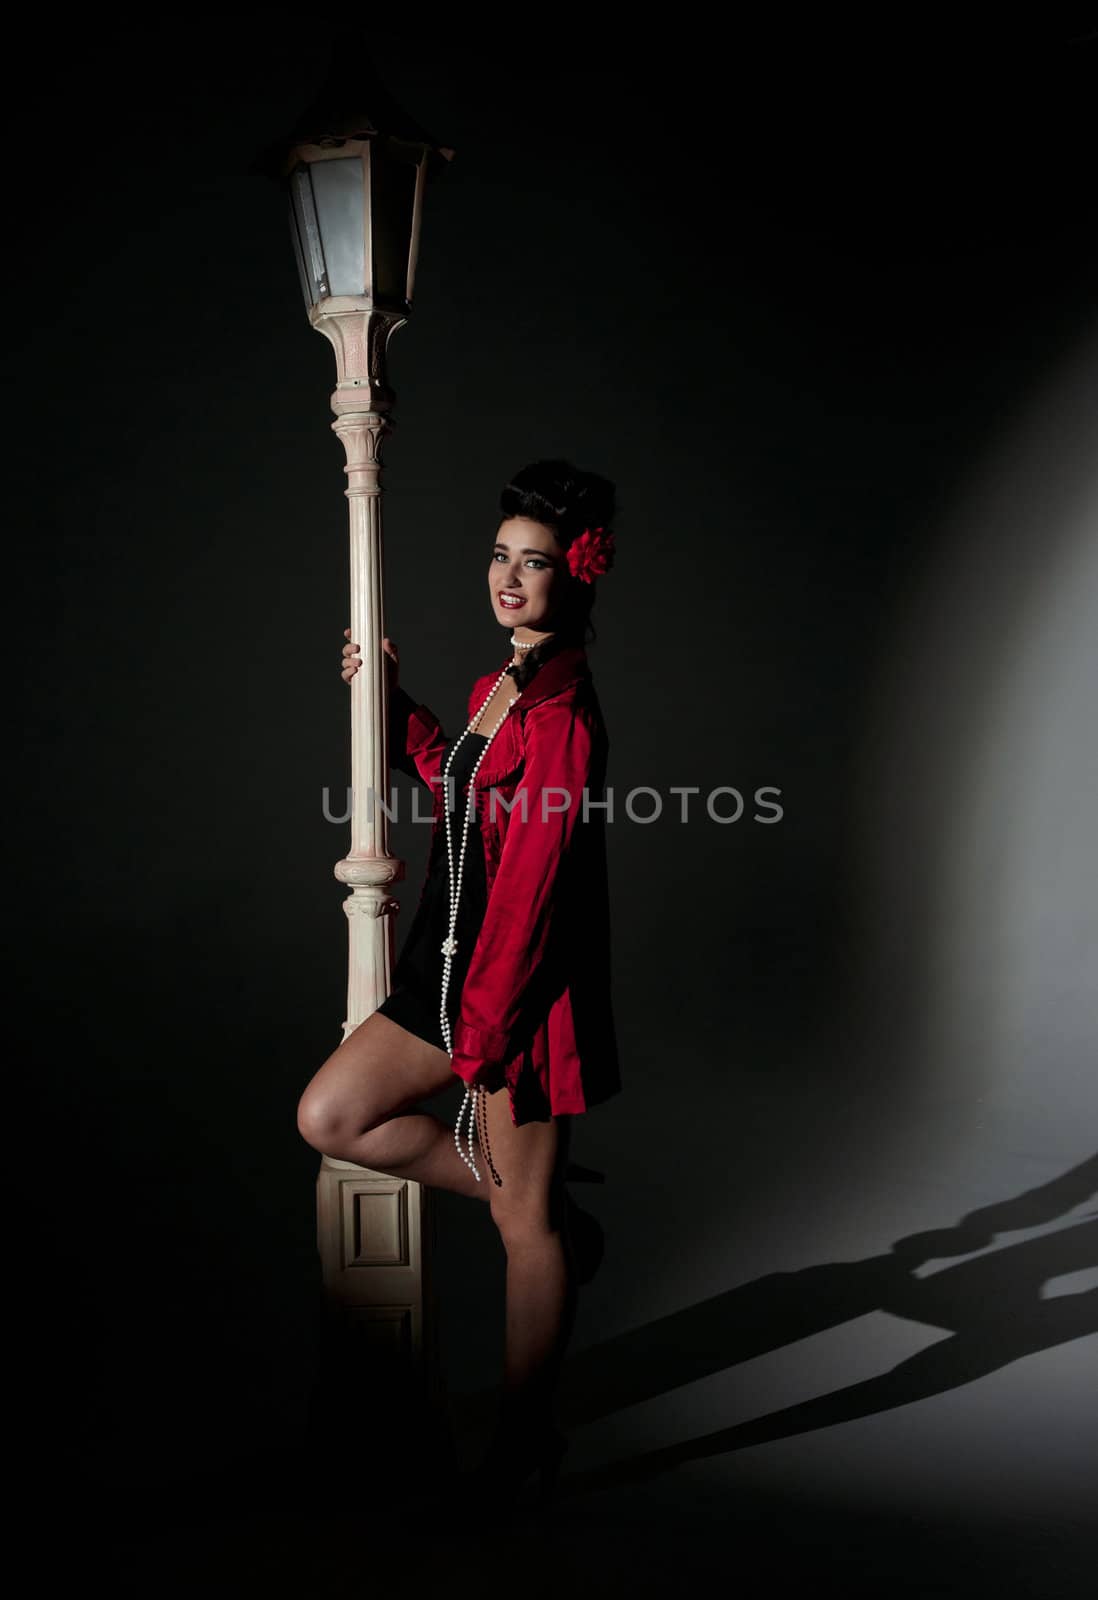 young woman and lightpole by clearviewstock